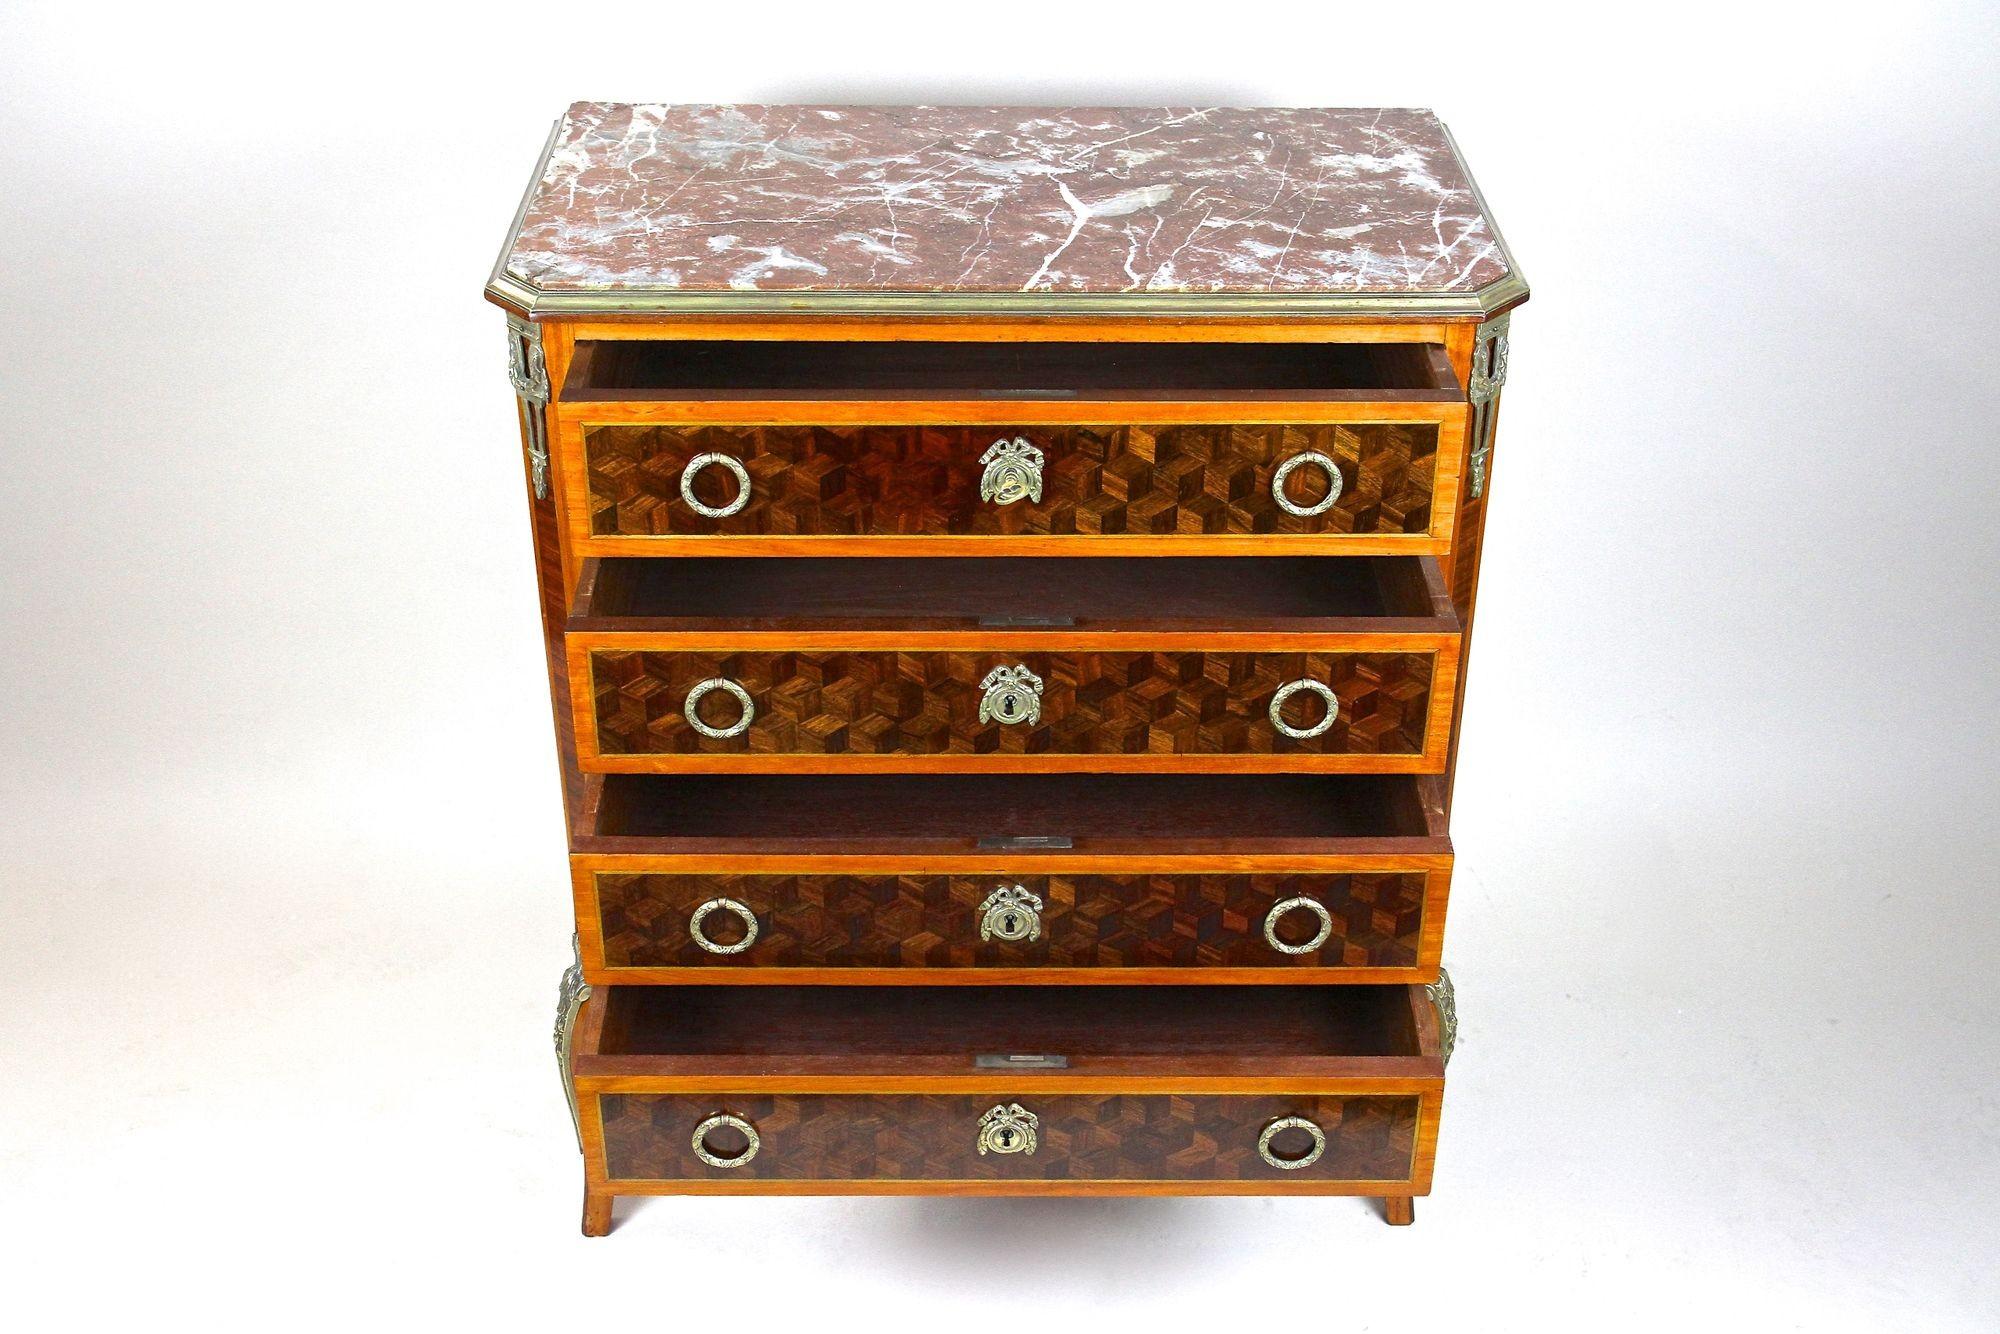 Polished 19th Century French Transitional Marquetry Chest of Drawers, France, circa 1870 For Sale